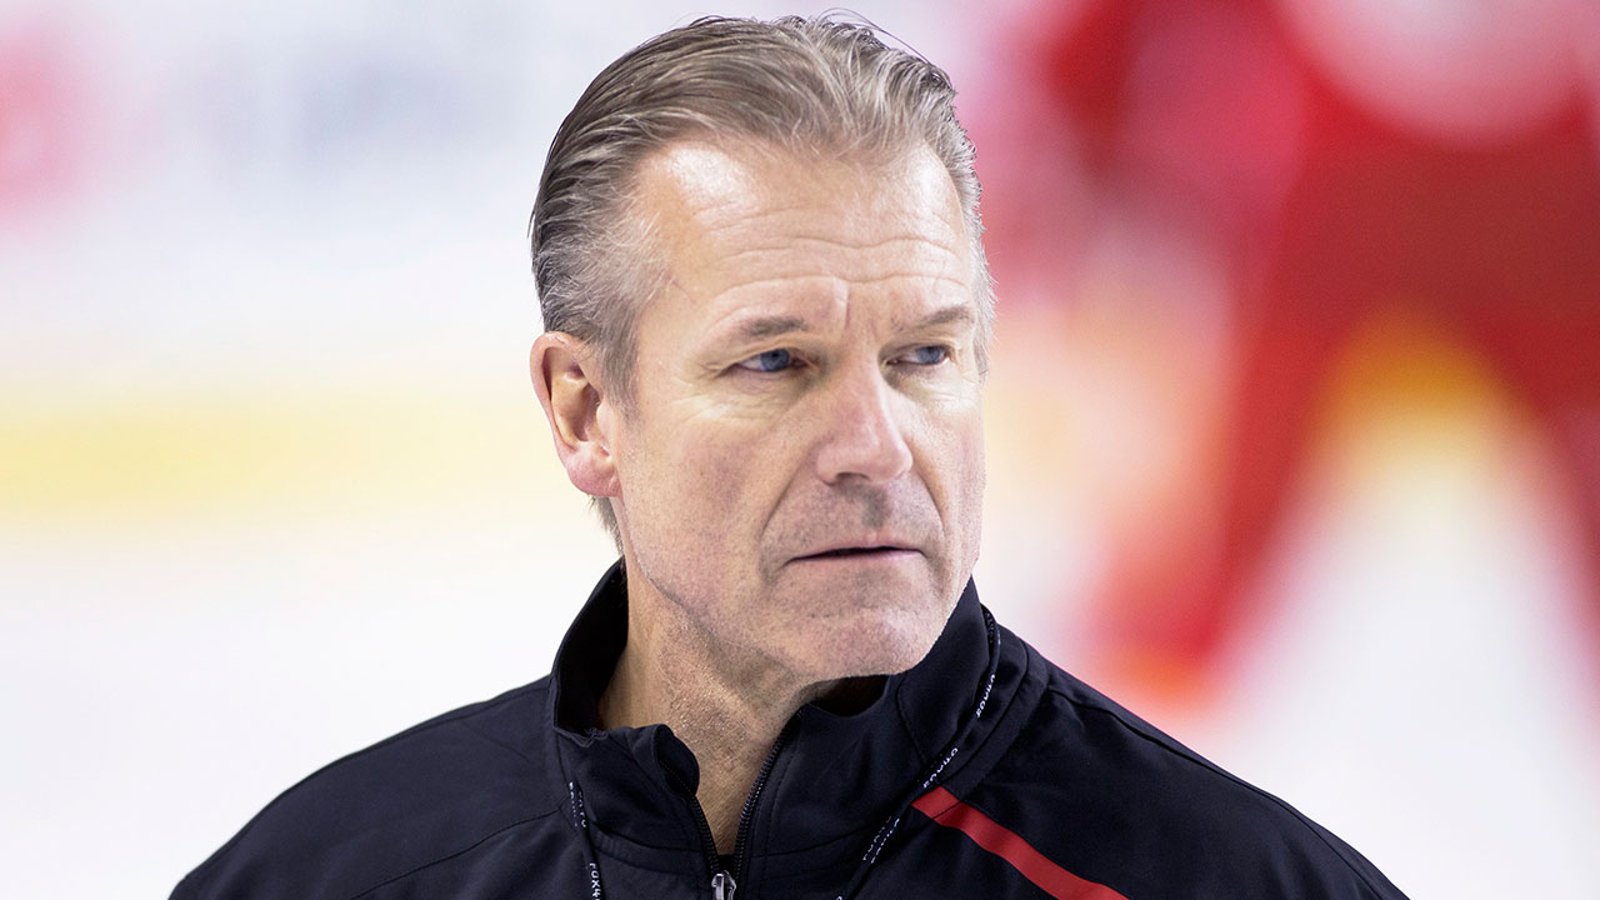 Rumor: Calgary Flames have reportedly picked their next head coach.